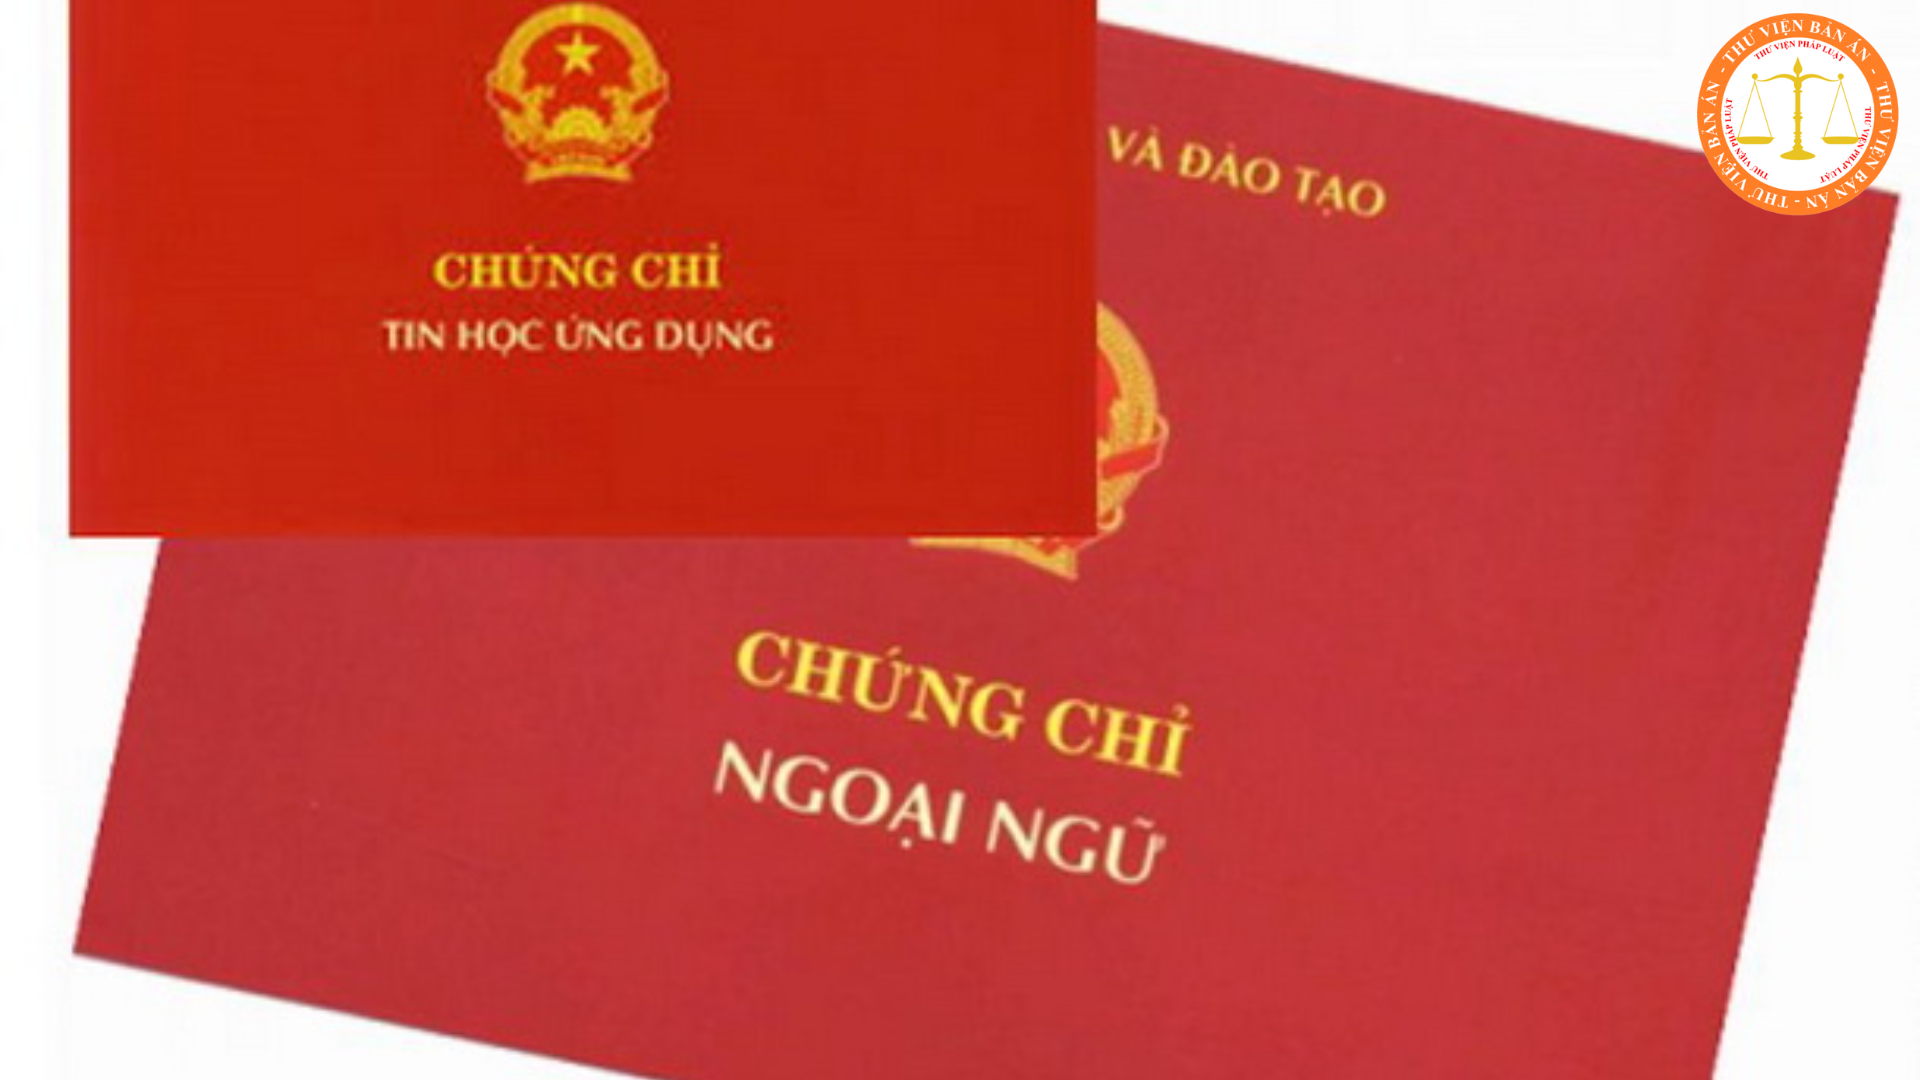 19 positions of officials and public employees are exempted from certificates of foreign languages and informatics in Vietnam